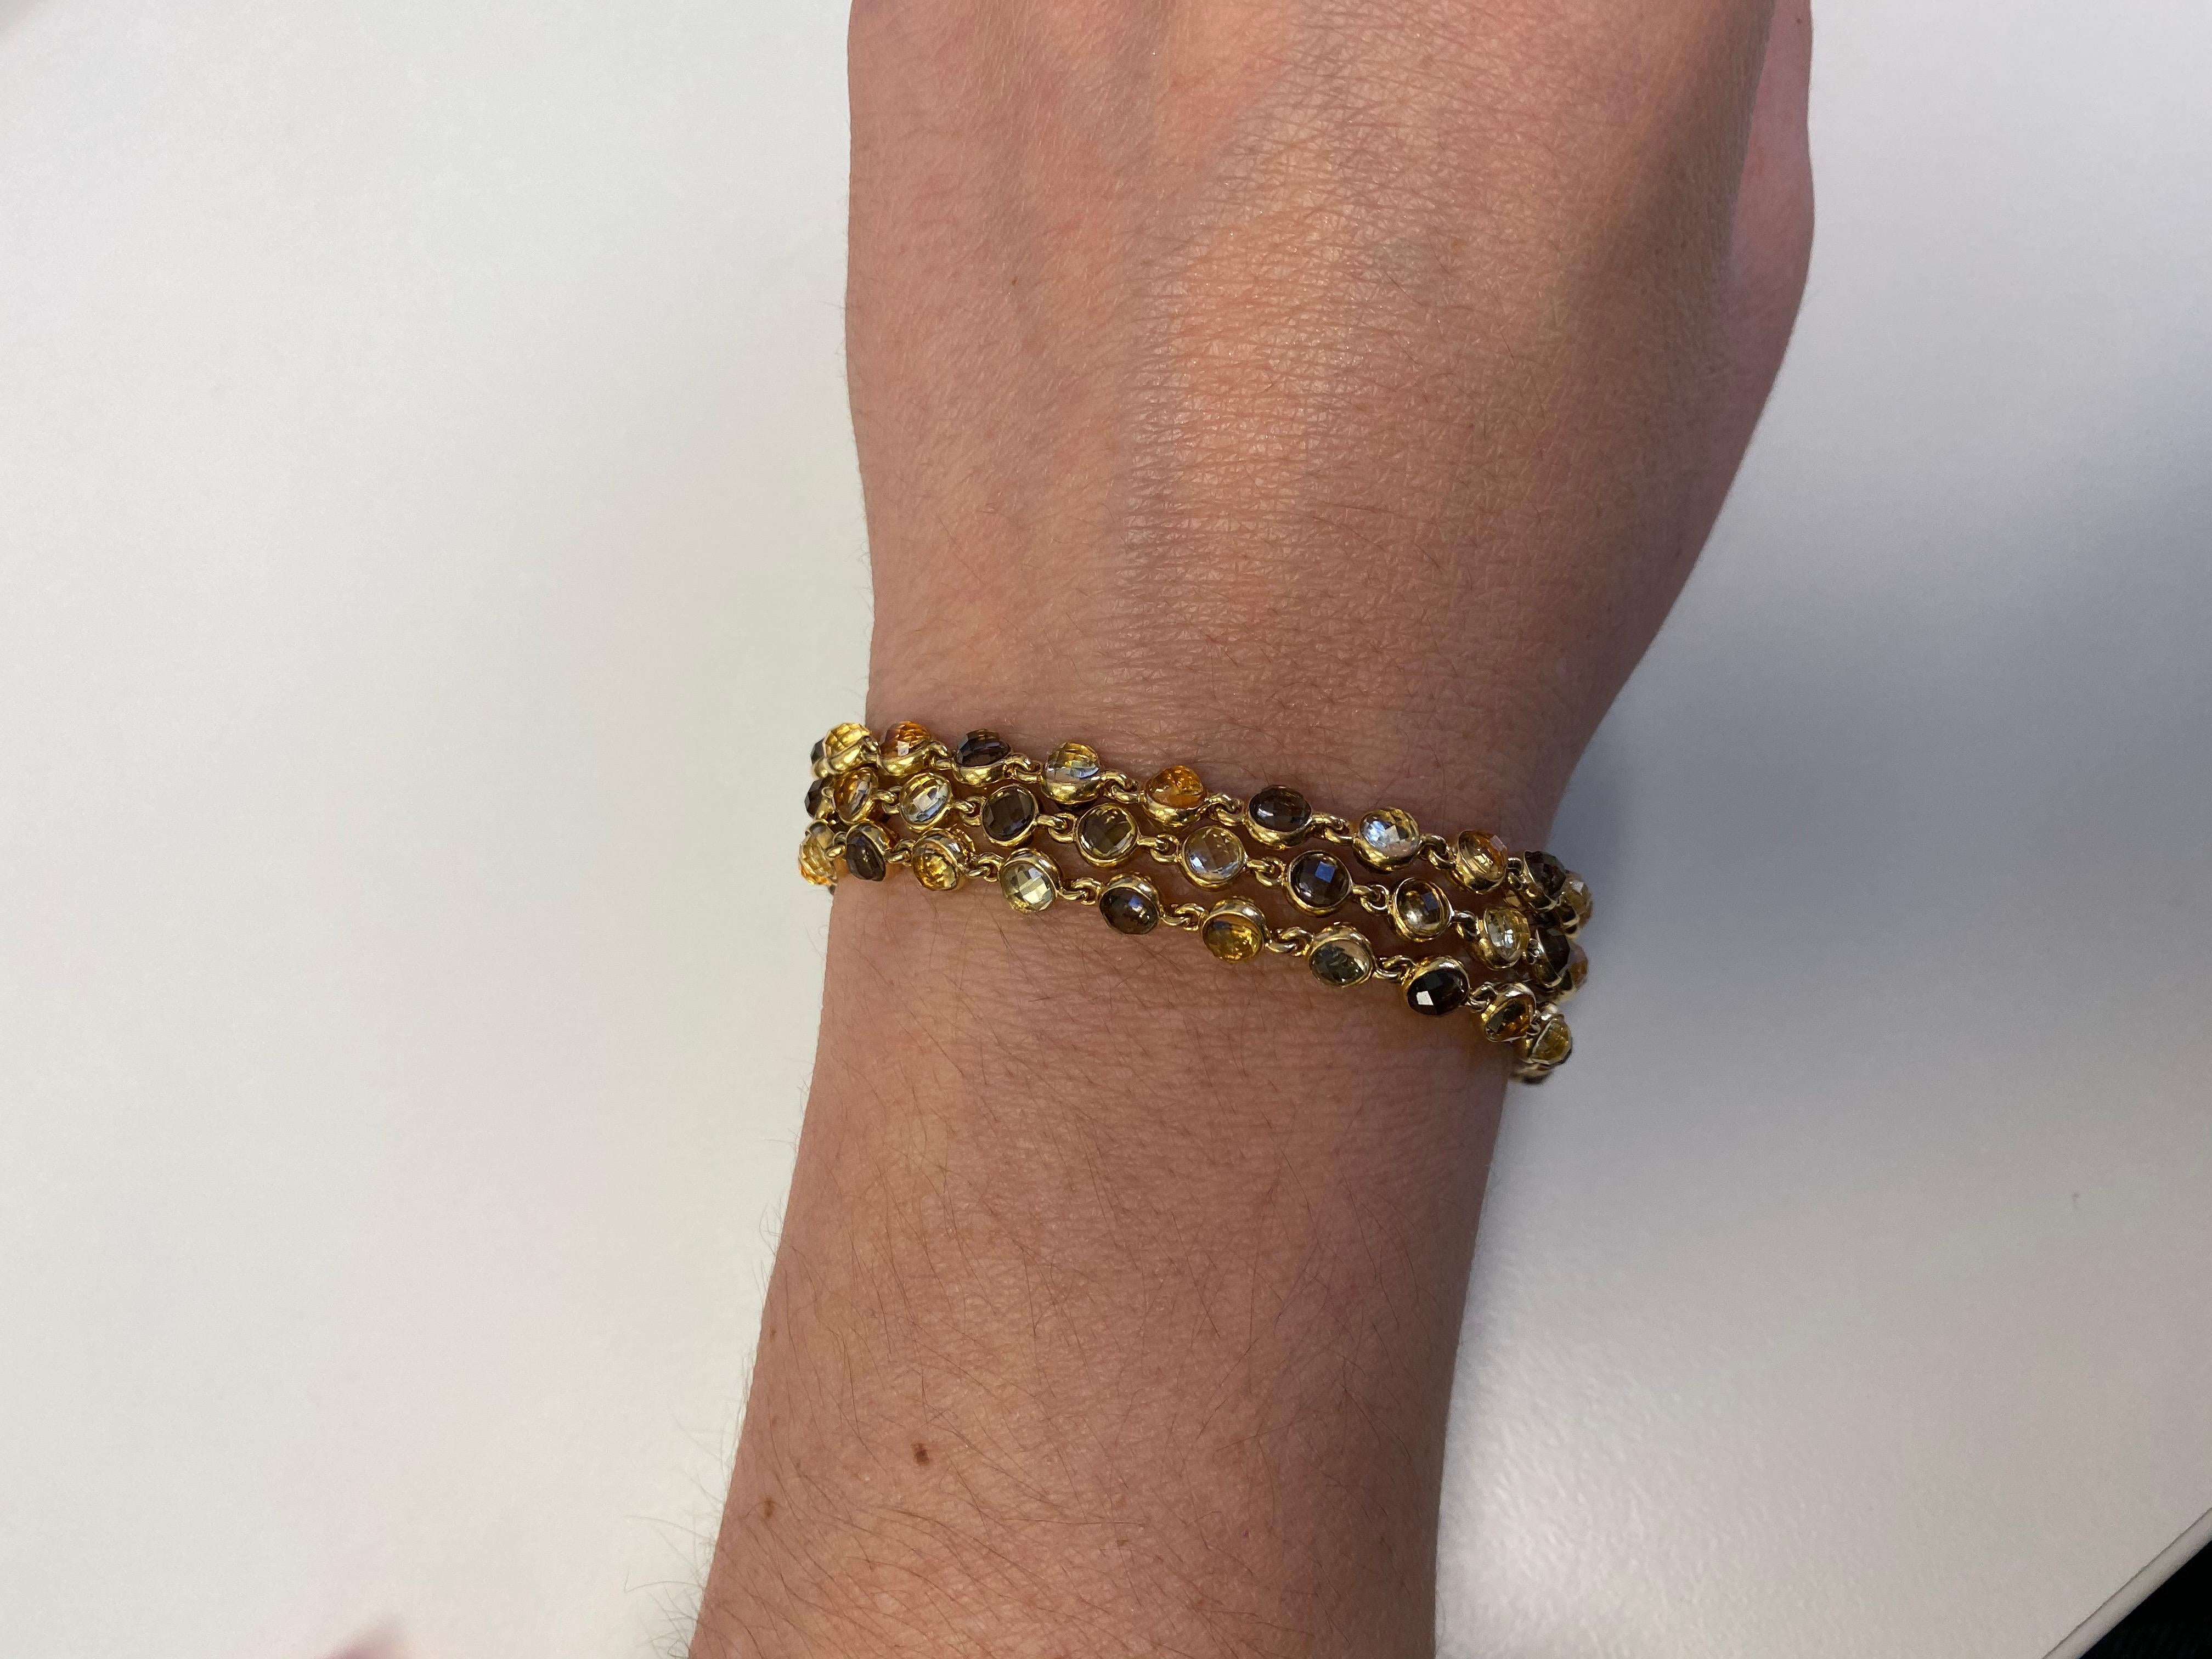 Hammerman Brothers 18 karat yellow gold bracelet with three strands of citrine, smokey topaz, and lemon quartz. The stones are cleverly set with varying colors from front to back, scintillating different flashes of color as you move your wrist. 